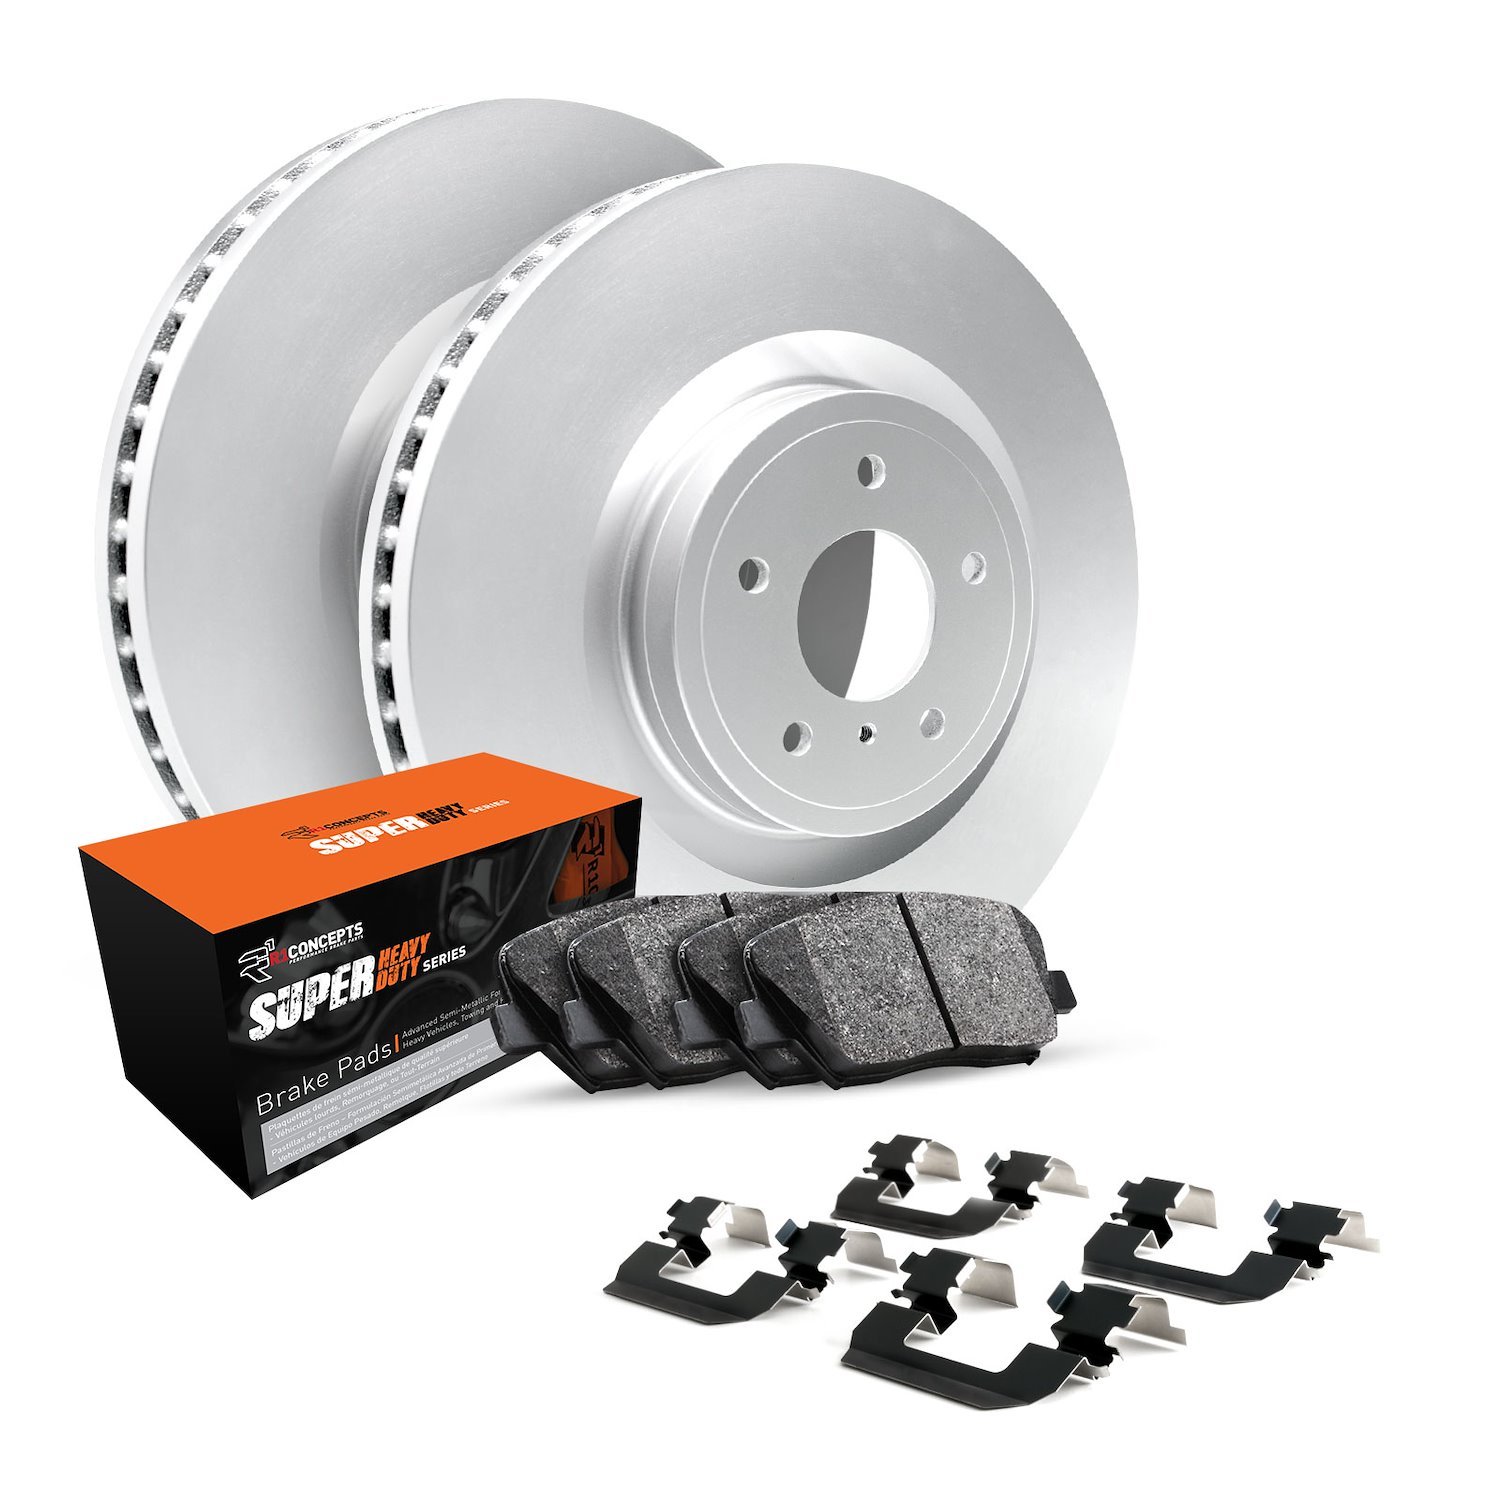 GEO-Carbon Brake Rotor Set w/Super-Duty Pads & Hardware, Fits Select Ford/Lincoln/Mercury/Mazda, Position: Rear